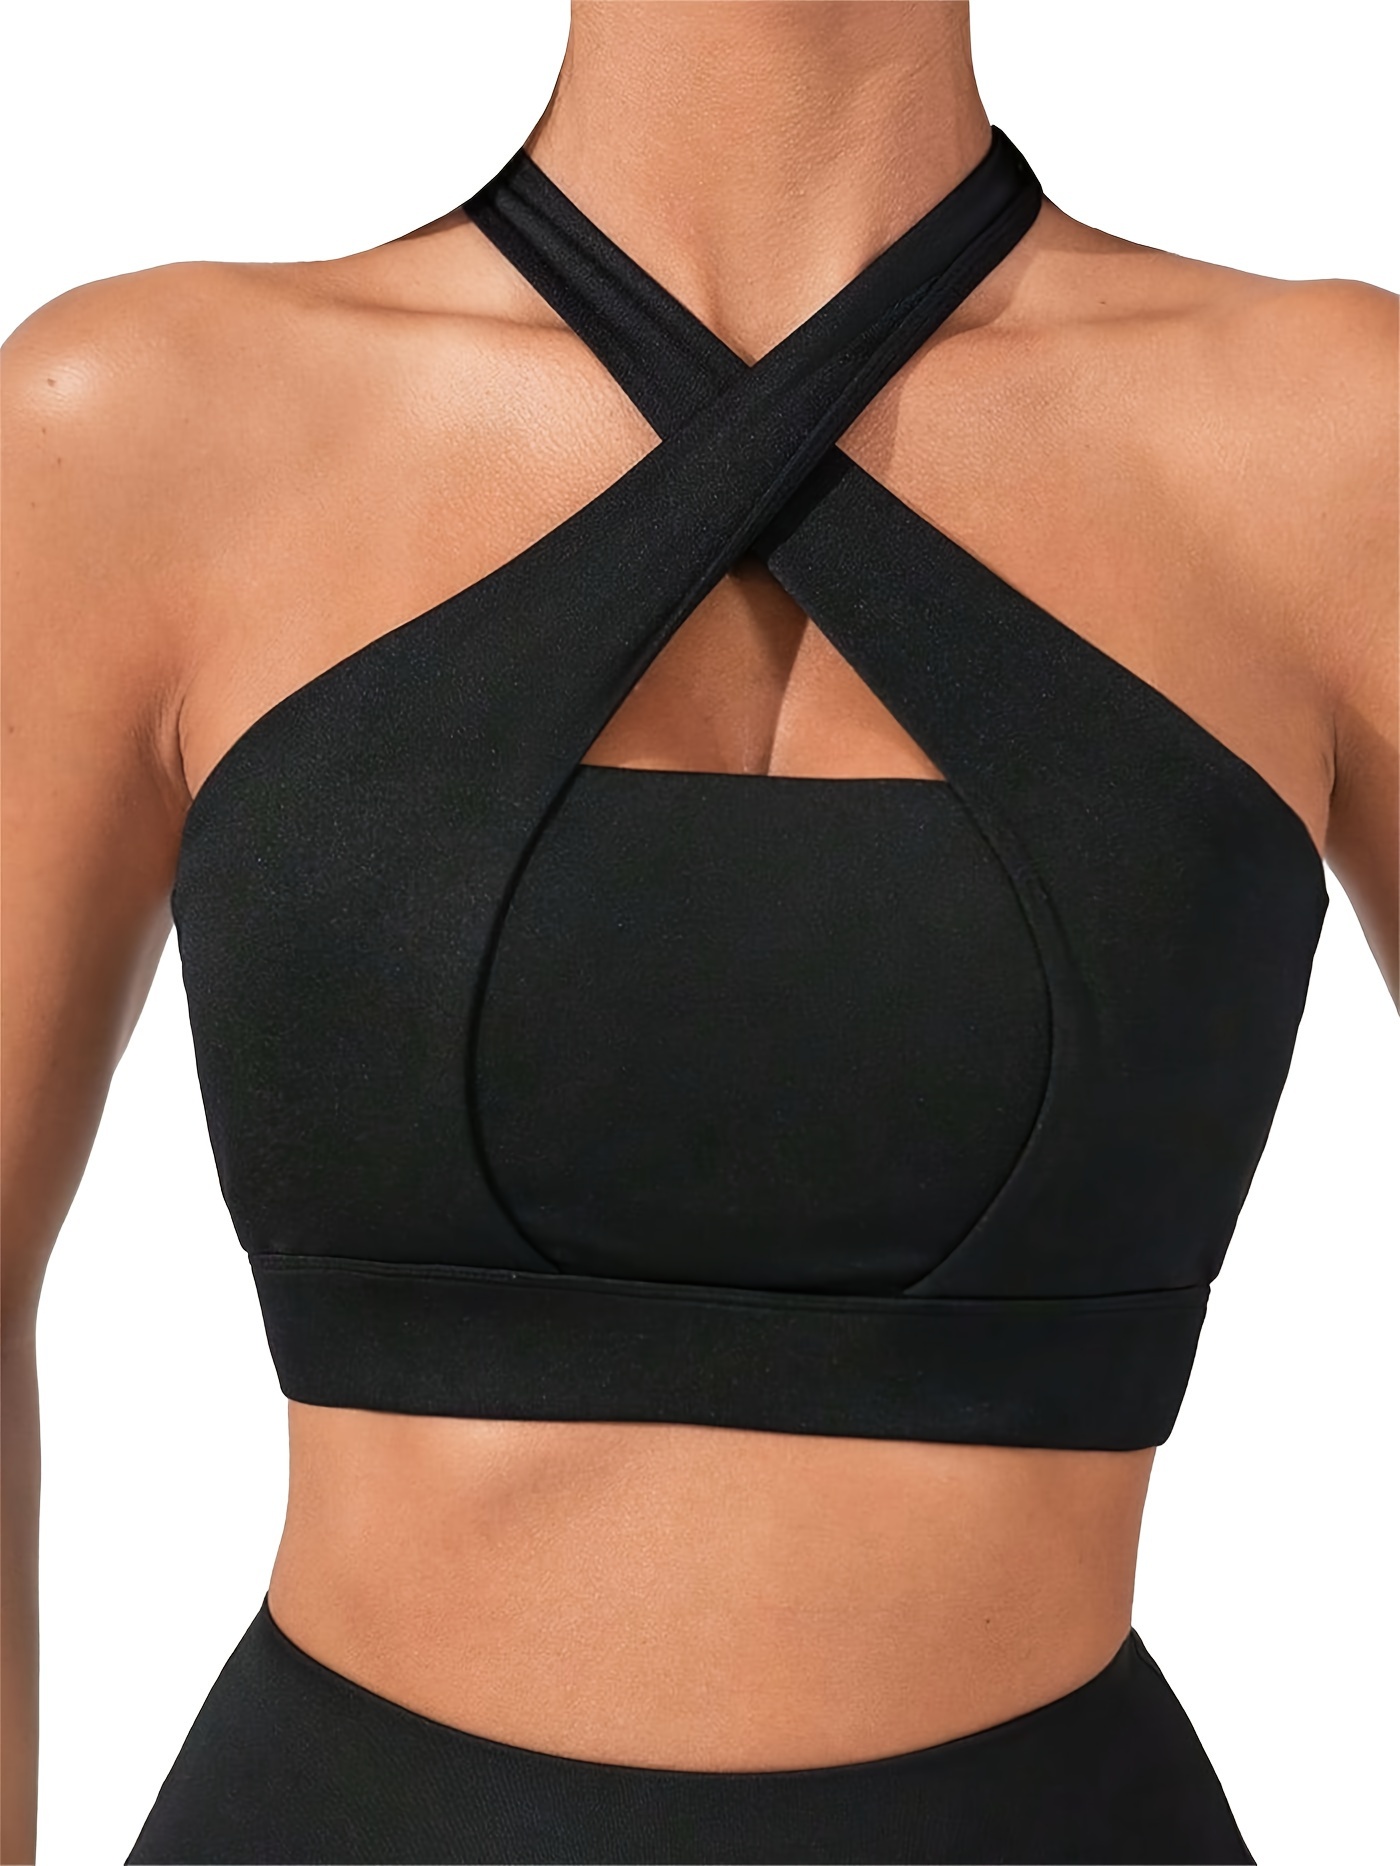 Plus Size Casual Sports Bra, Women's Plus Bra Comfort High Impact Cut Out  Wide Strap Racer Back Solid Stretchy Yoga Workout Bra